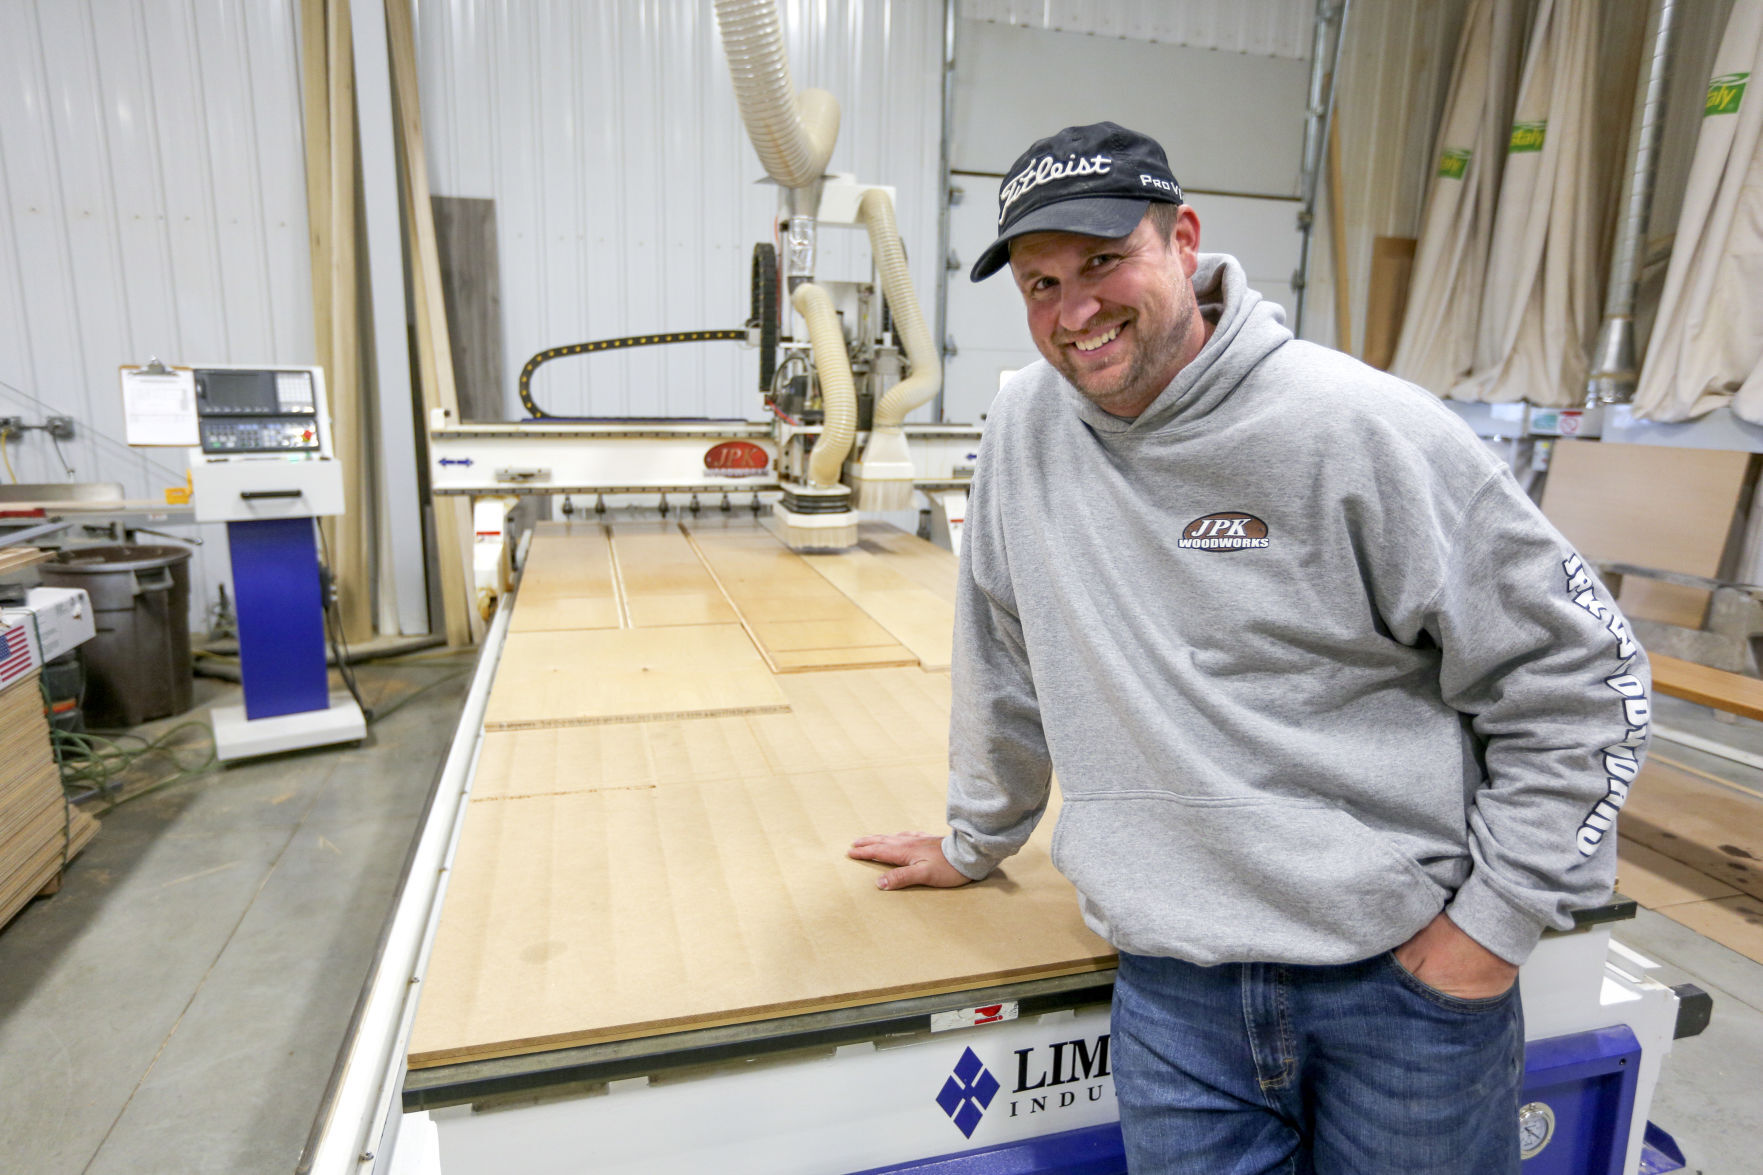 Jon Kluck, the owner of JPK Woodworks, shows the inside of his business at 8005 Seippel Court on Monday.    PHOTO CREDIT: Dave Kettering